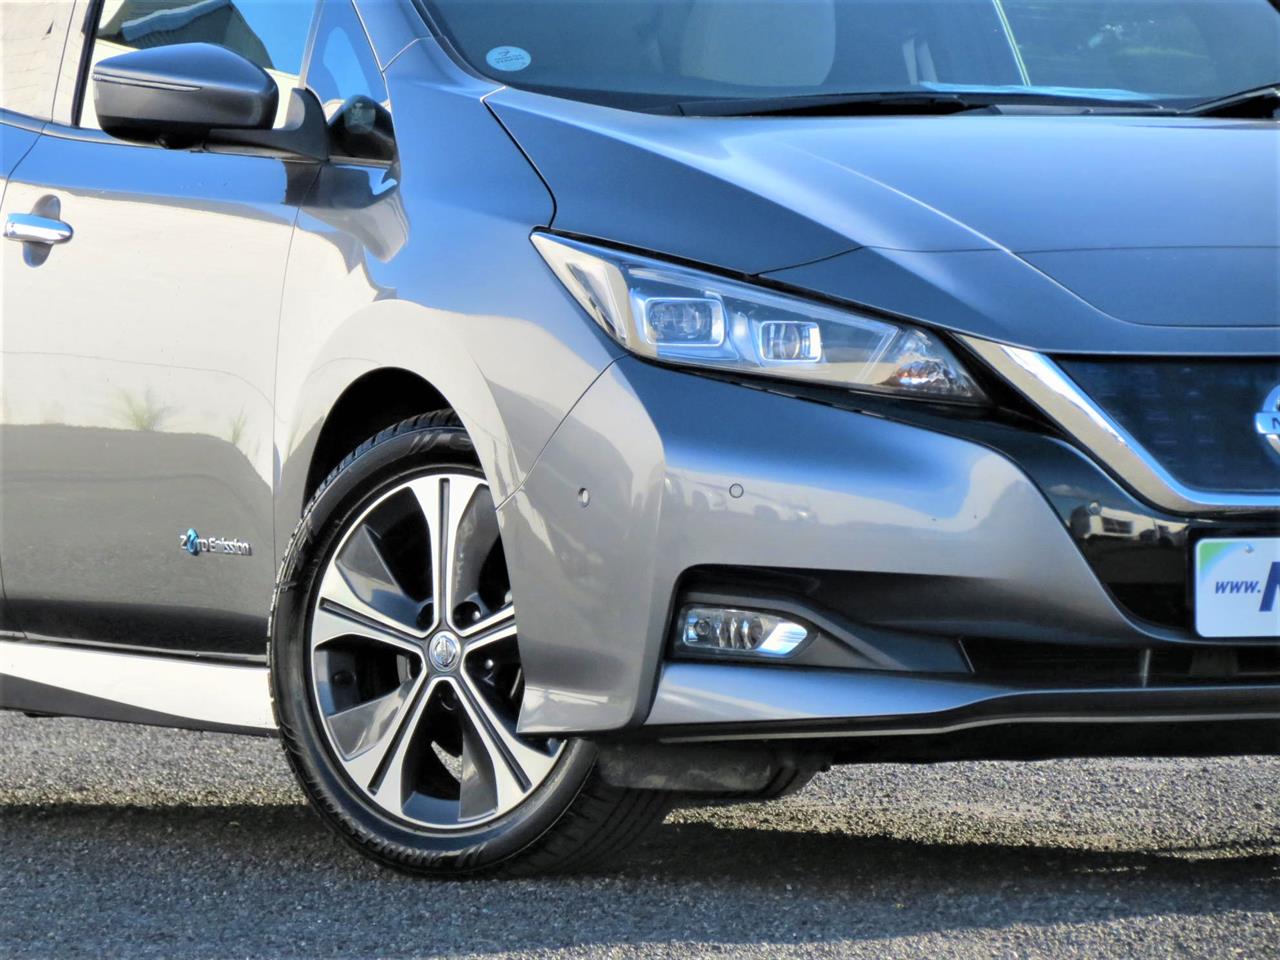 2018 Nissan Leaf only $61 weekly